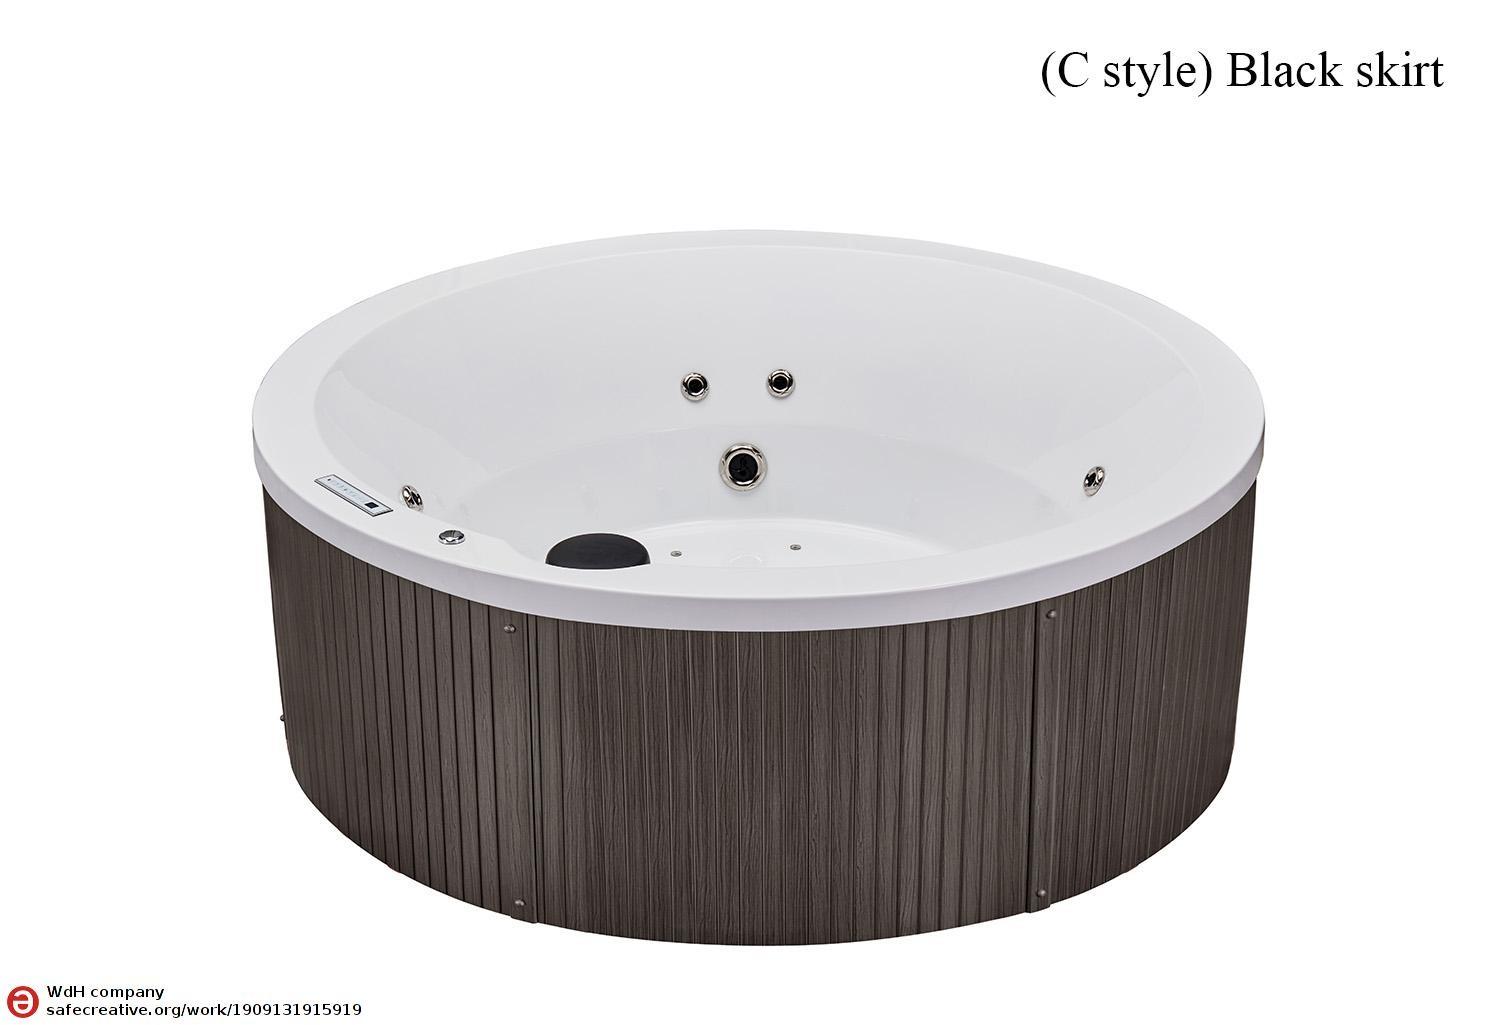 Spa jacuzzi exterior AW-021 low cost